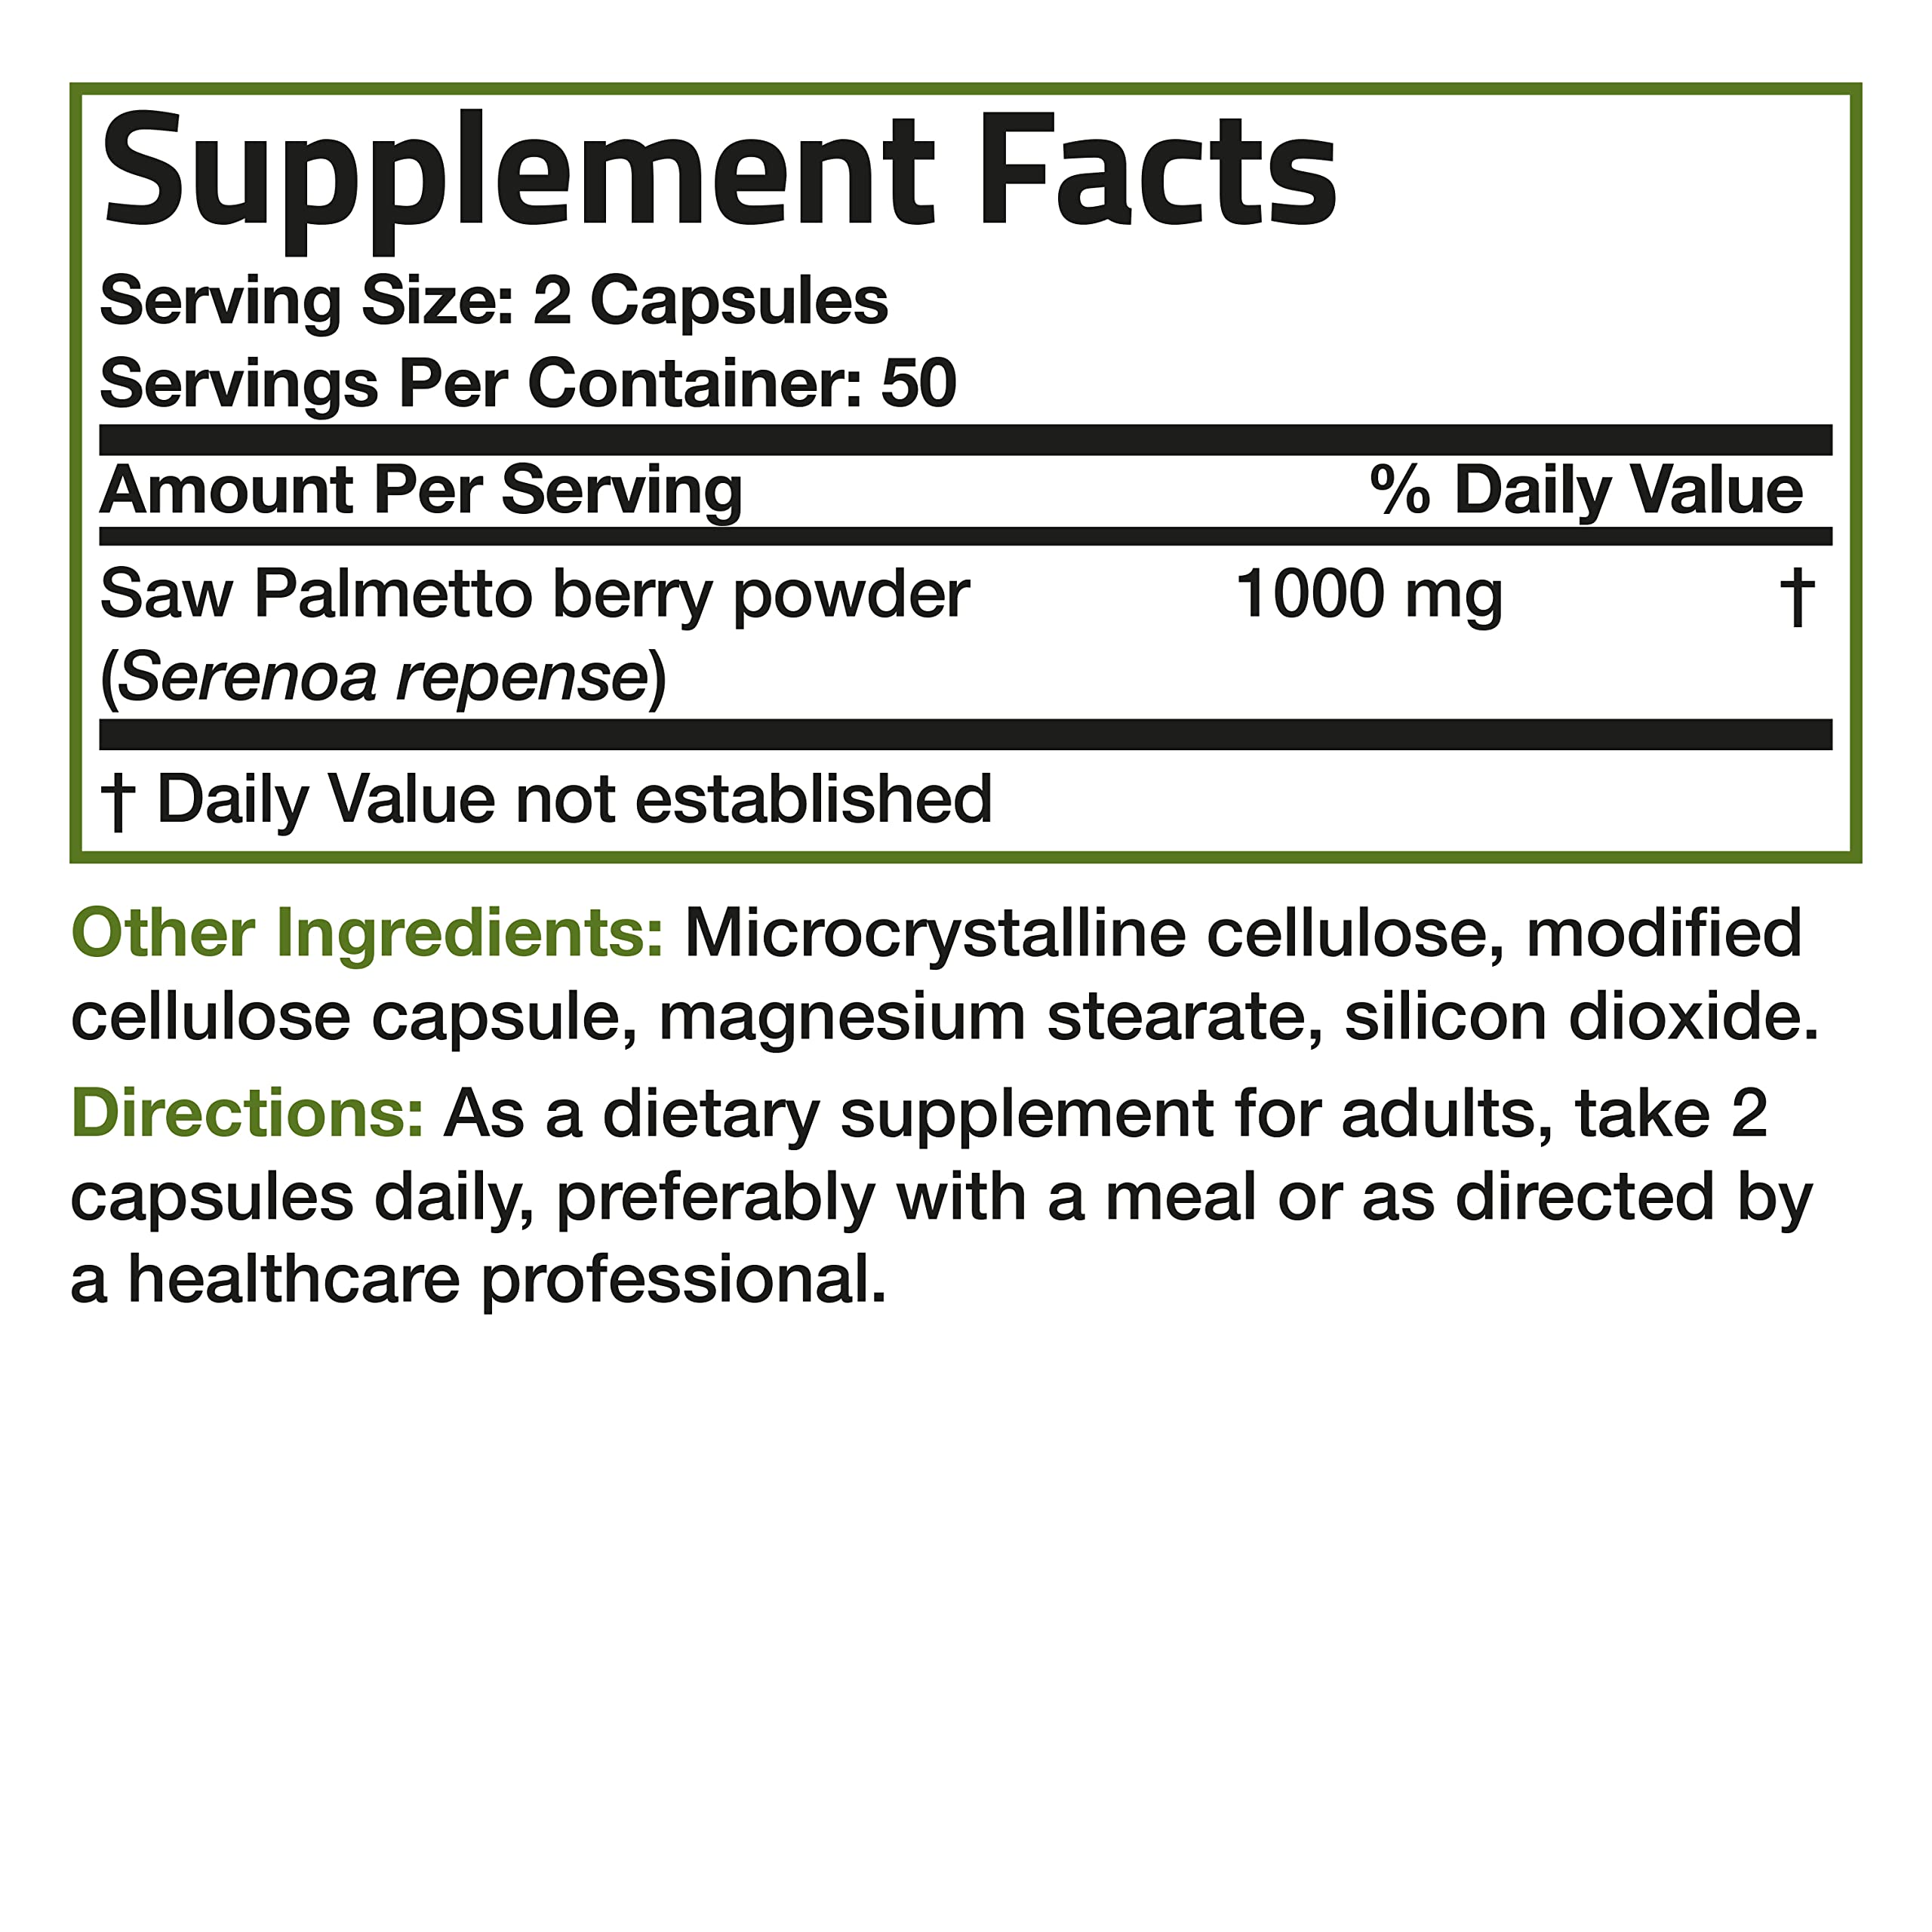 Saw Palmetto Extra Strength - 1,000 mg view 6 of 6